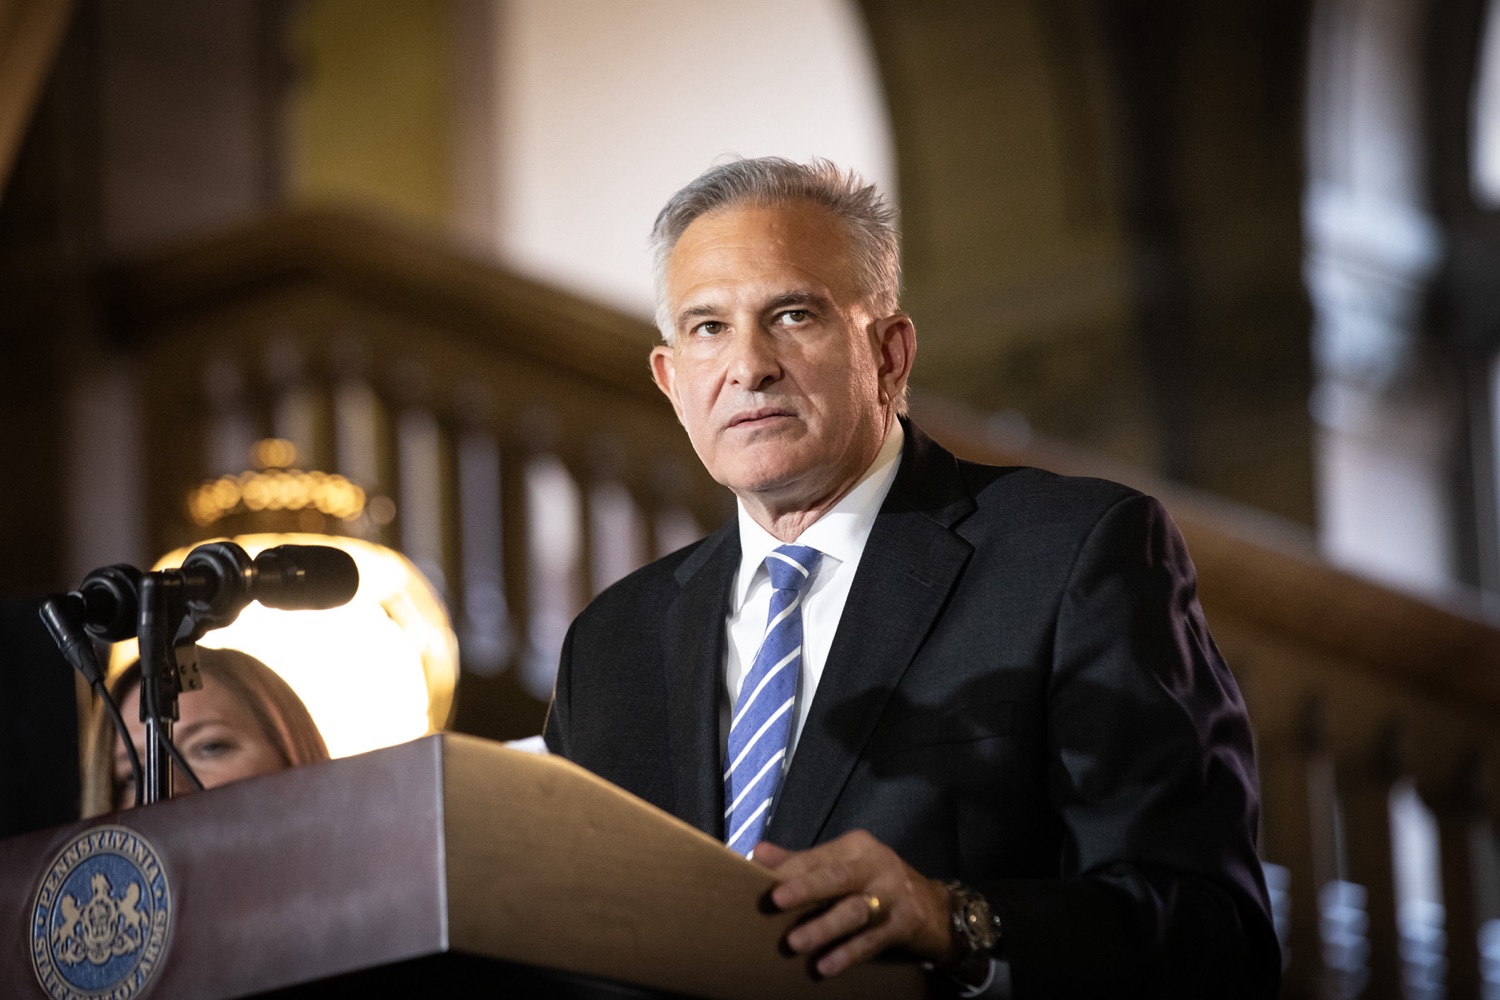 Pennsylvania Attorney General Michelle Henry and Allegheny County District Attorney Stephen Zappala were joined by law enforcement and community collaborators to announce a new public safety initiative in Allegheny County. Pictured here is Stephen Zappala, Allegheny County District Attorney, delivering remarks during the event. Pittsburgh, Pennsylvania.<br><a href="https://filesource.amperwave.net/commonwealthofpa/photo/24297_oag_publicSafety_JAP_07.jpg" target="_blank">⇣ Download Photo</a>